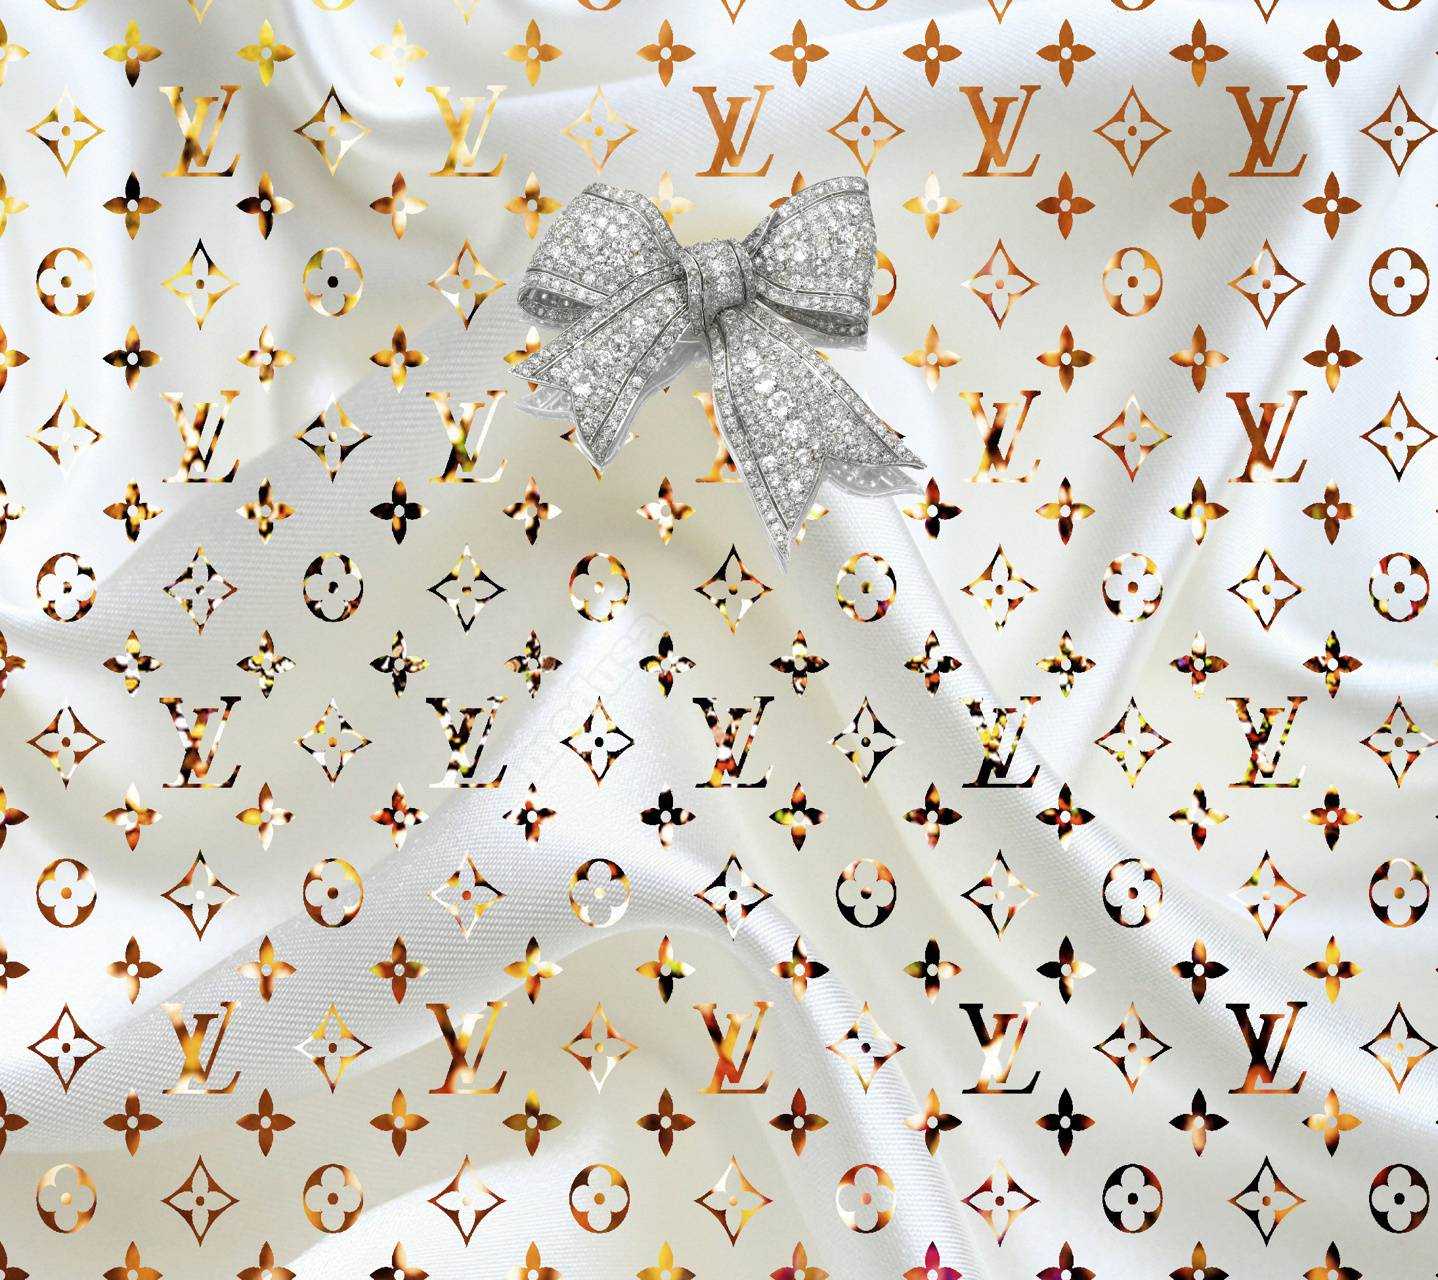 Louis Vuitton, Chanel, Gucci Wallpapers For IPhone  Wallpaper iphone  christmas, Christmas wallpaper backgrounds, Christmas wallpaper